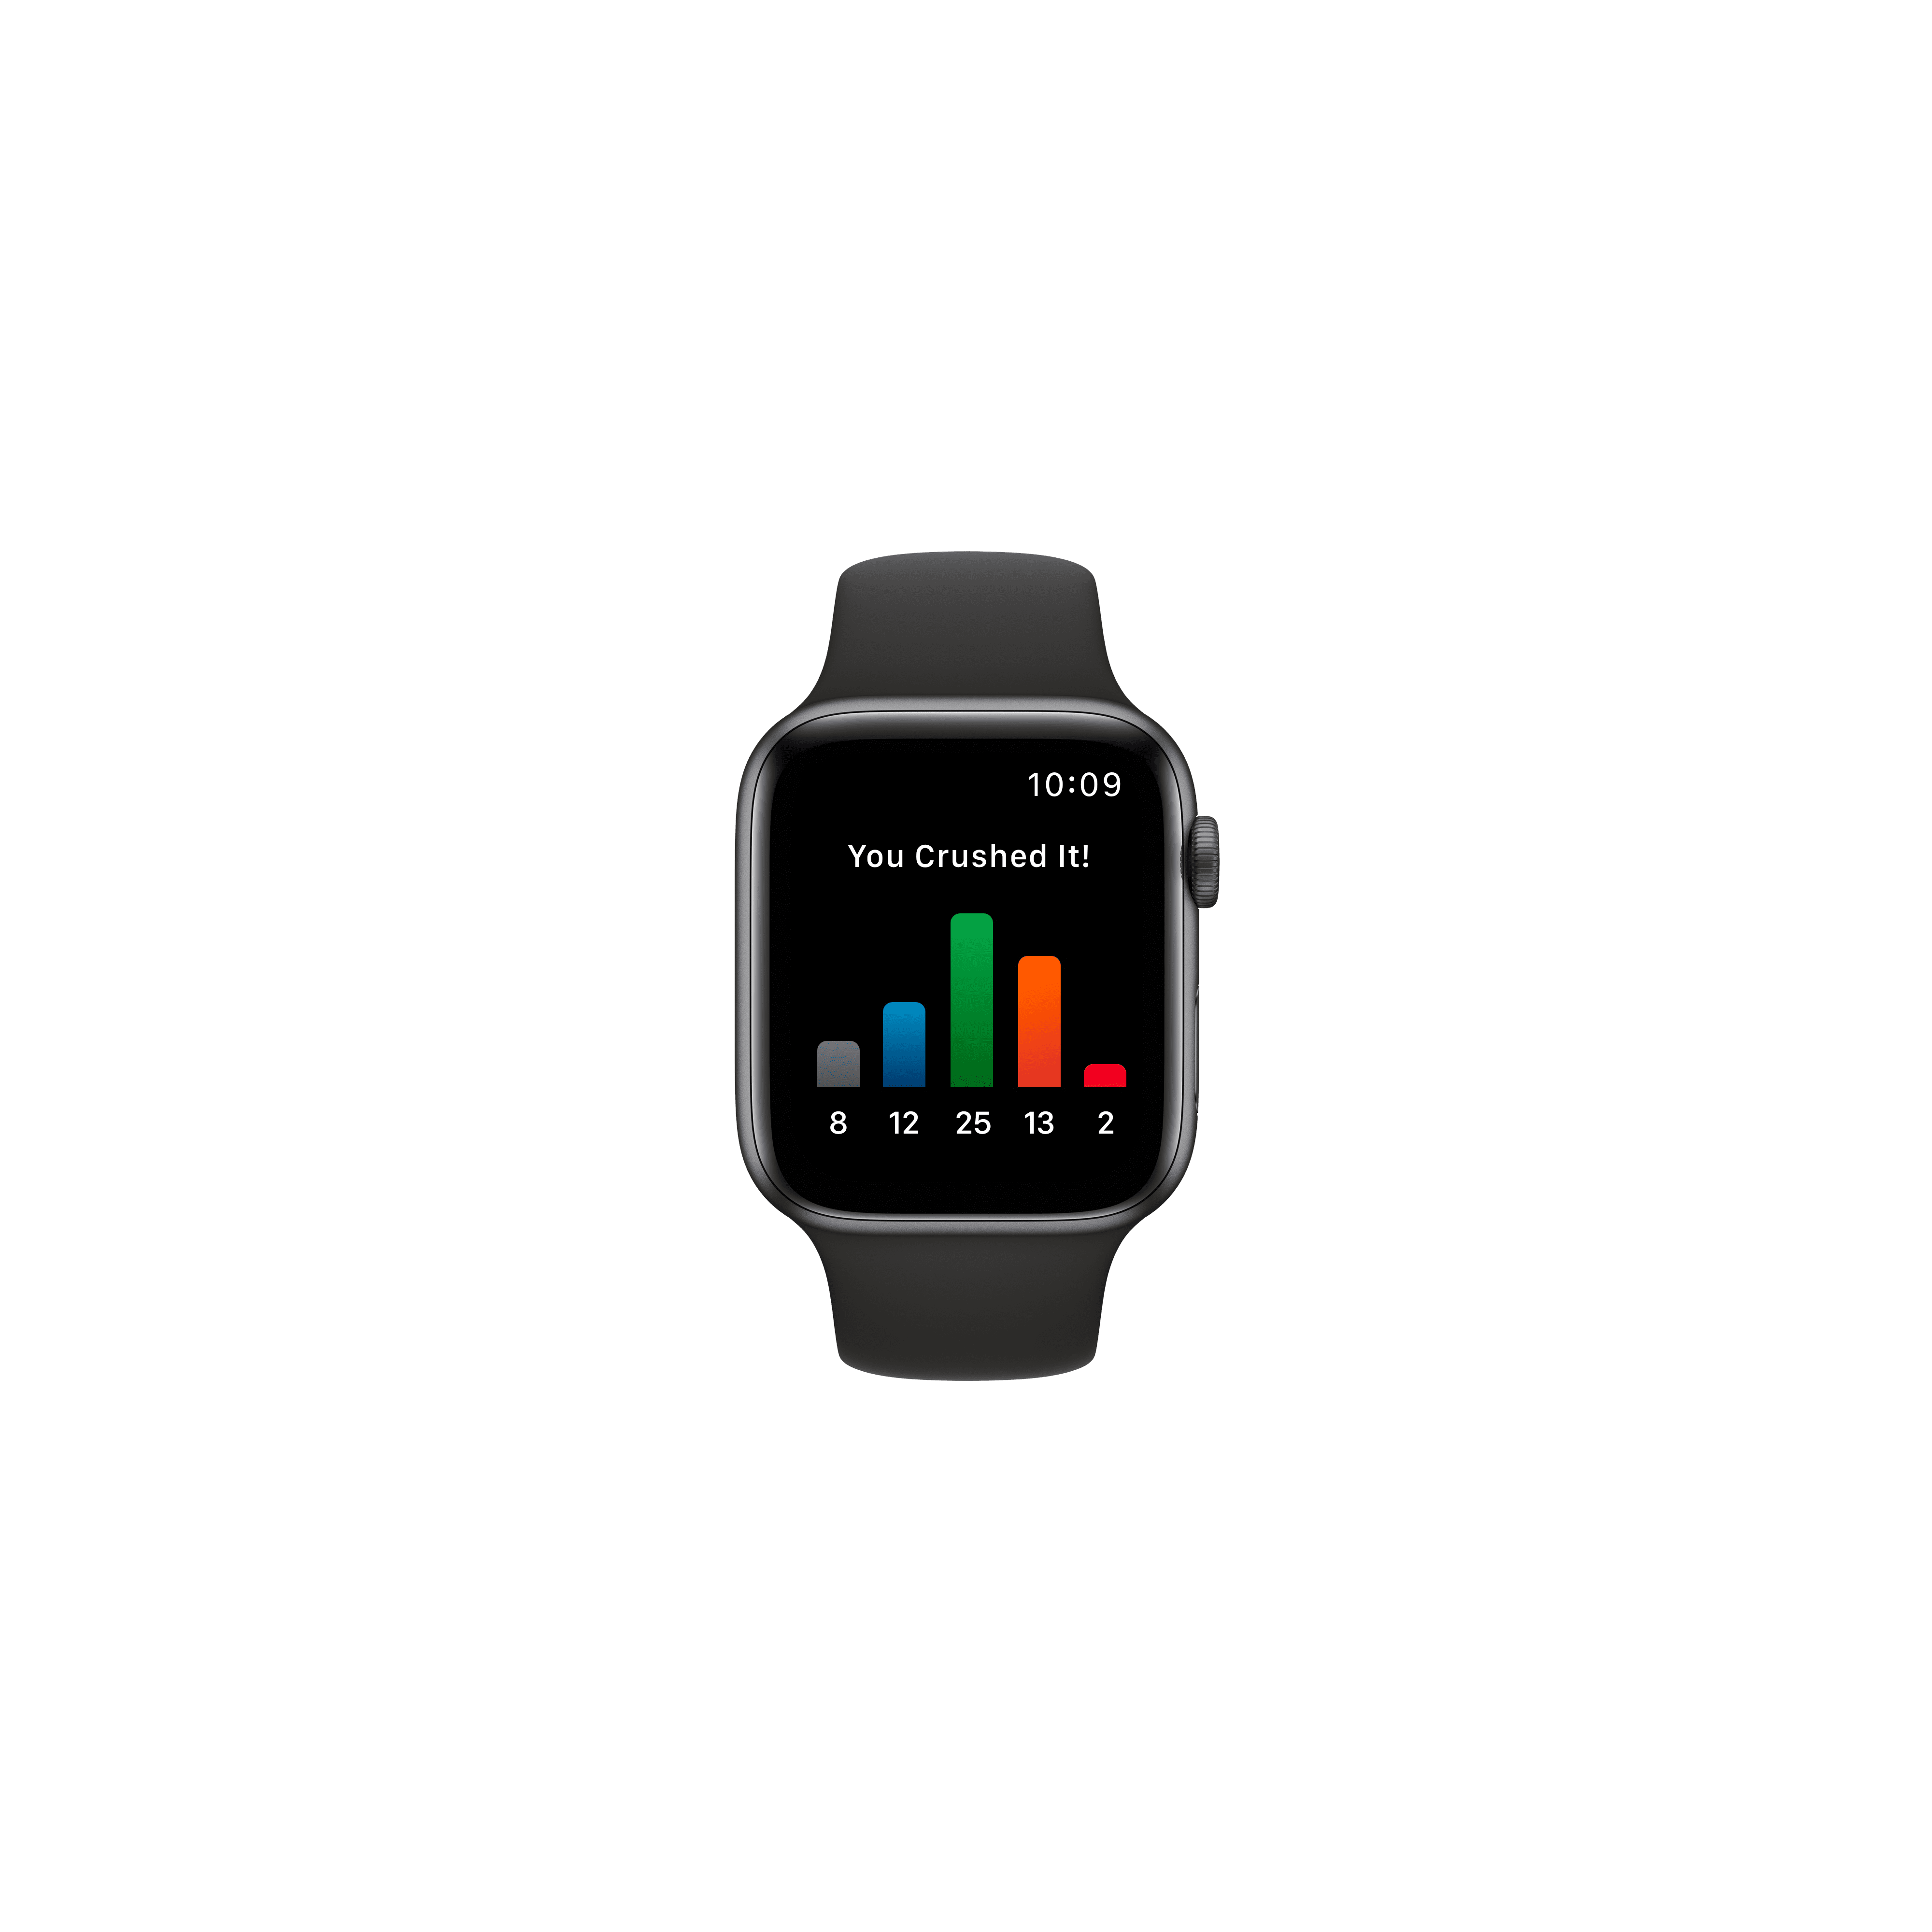 Orangetheory Fitness Shrewsbury Plaza - OTBEAT BURN can pair with your  Apple Watch! Add more accuracy to your workout 👍🏻 By connecting your OTbeat  Burn and Apple Watch, it allows you to